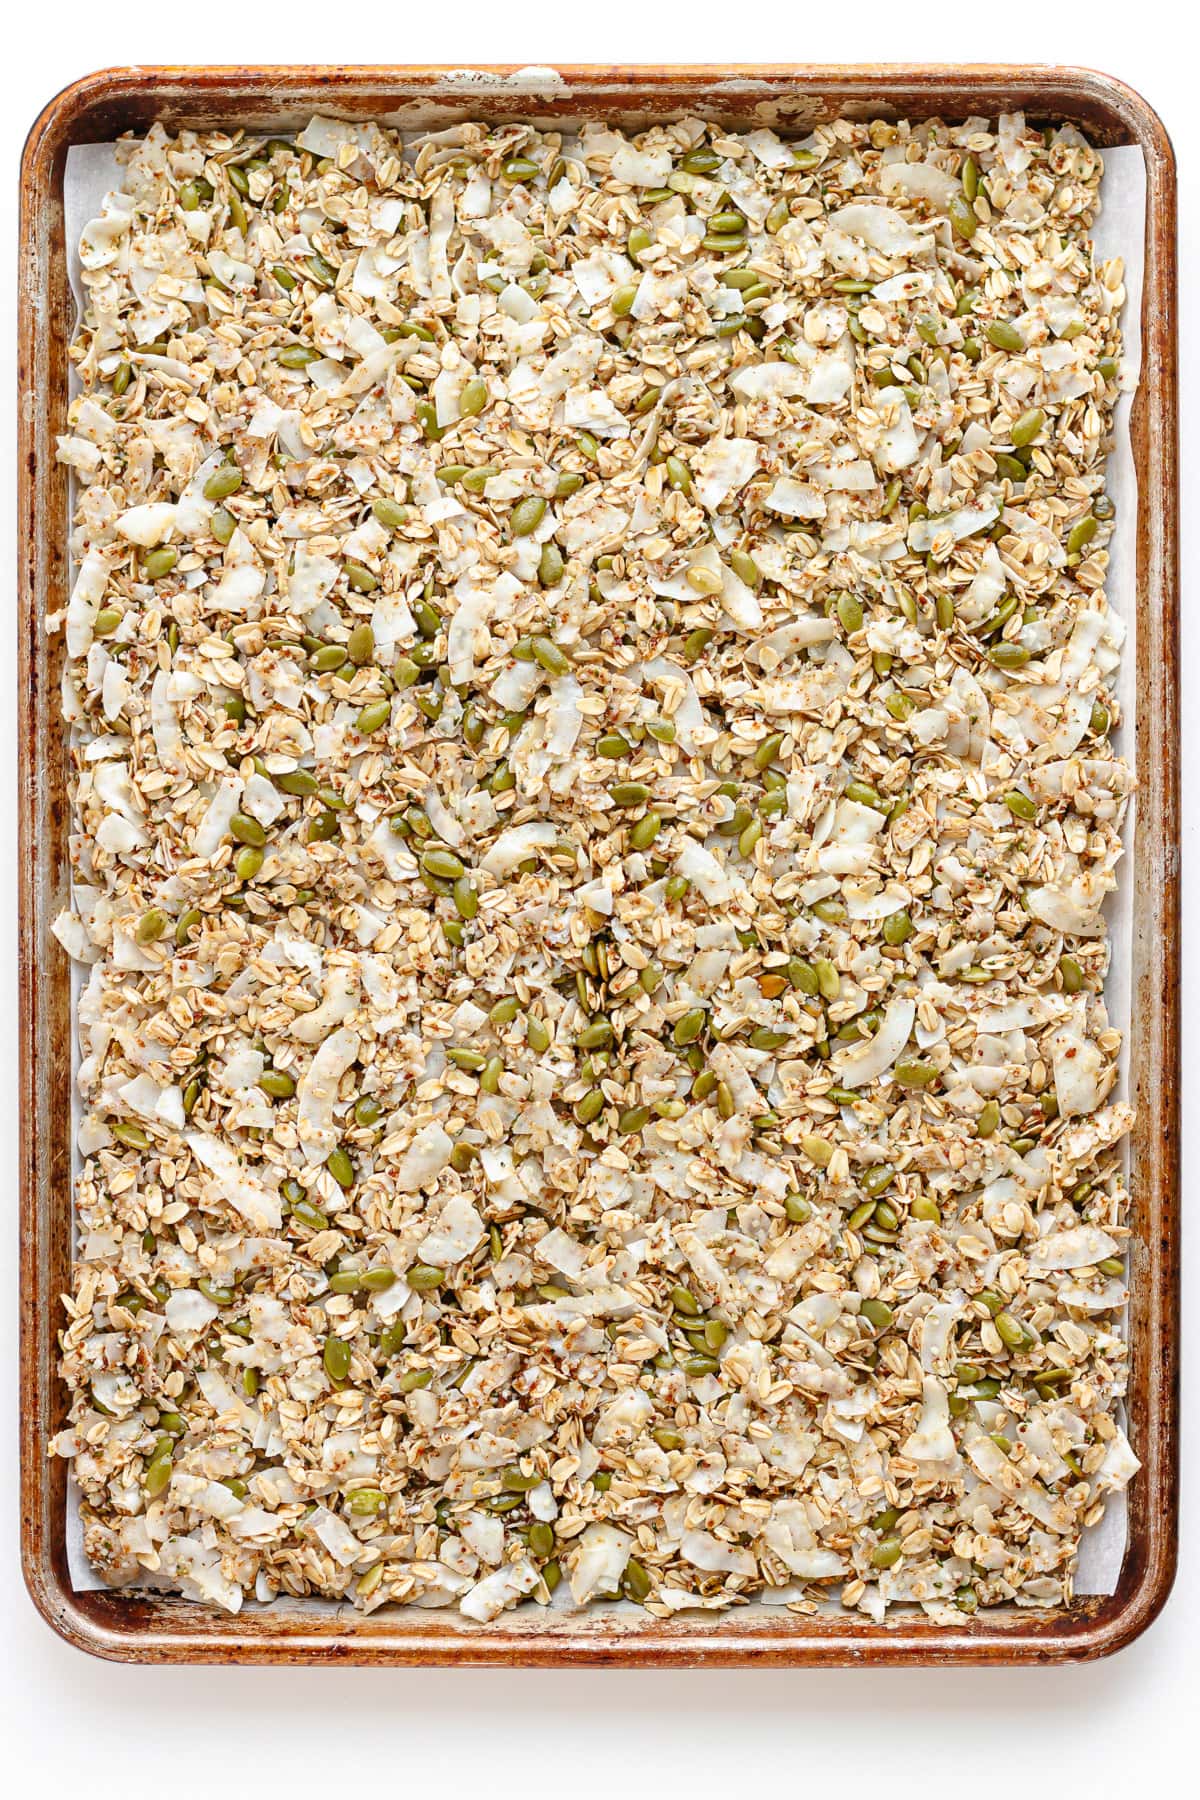 Uncooked coconut granola spread out evenly on a large baking sheet.